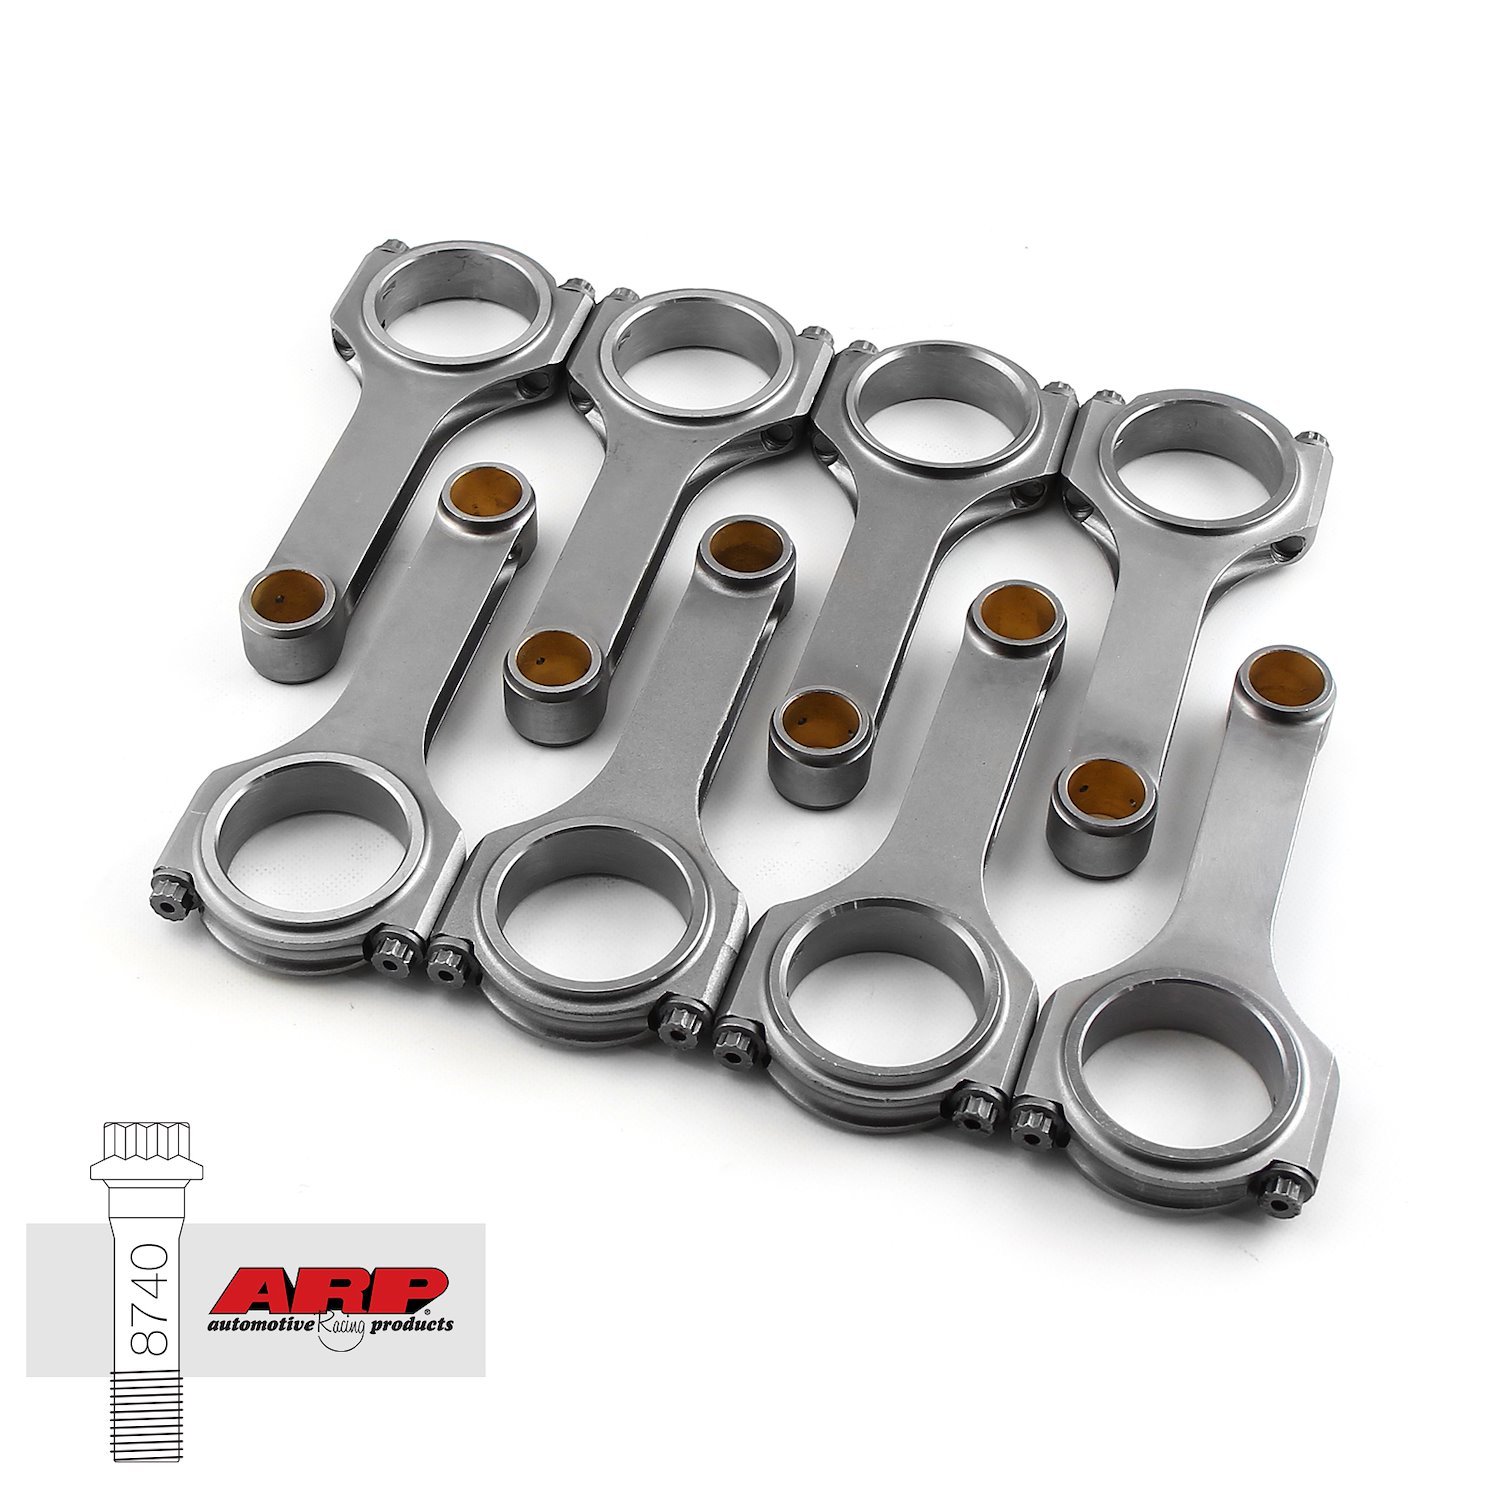 1-274-037 H Beam 6.000 in. 2.100 in. .927 in. 4340 Connecting Rods Chevy SBC 350 w/ ARP 2000